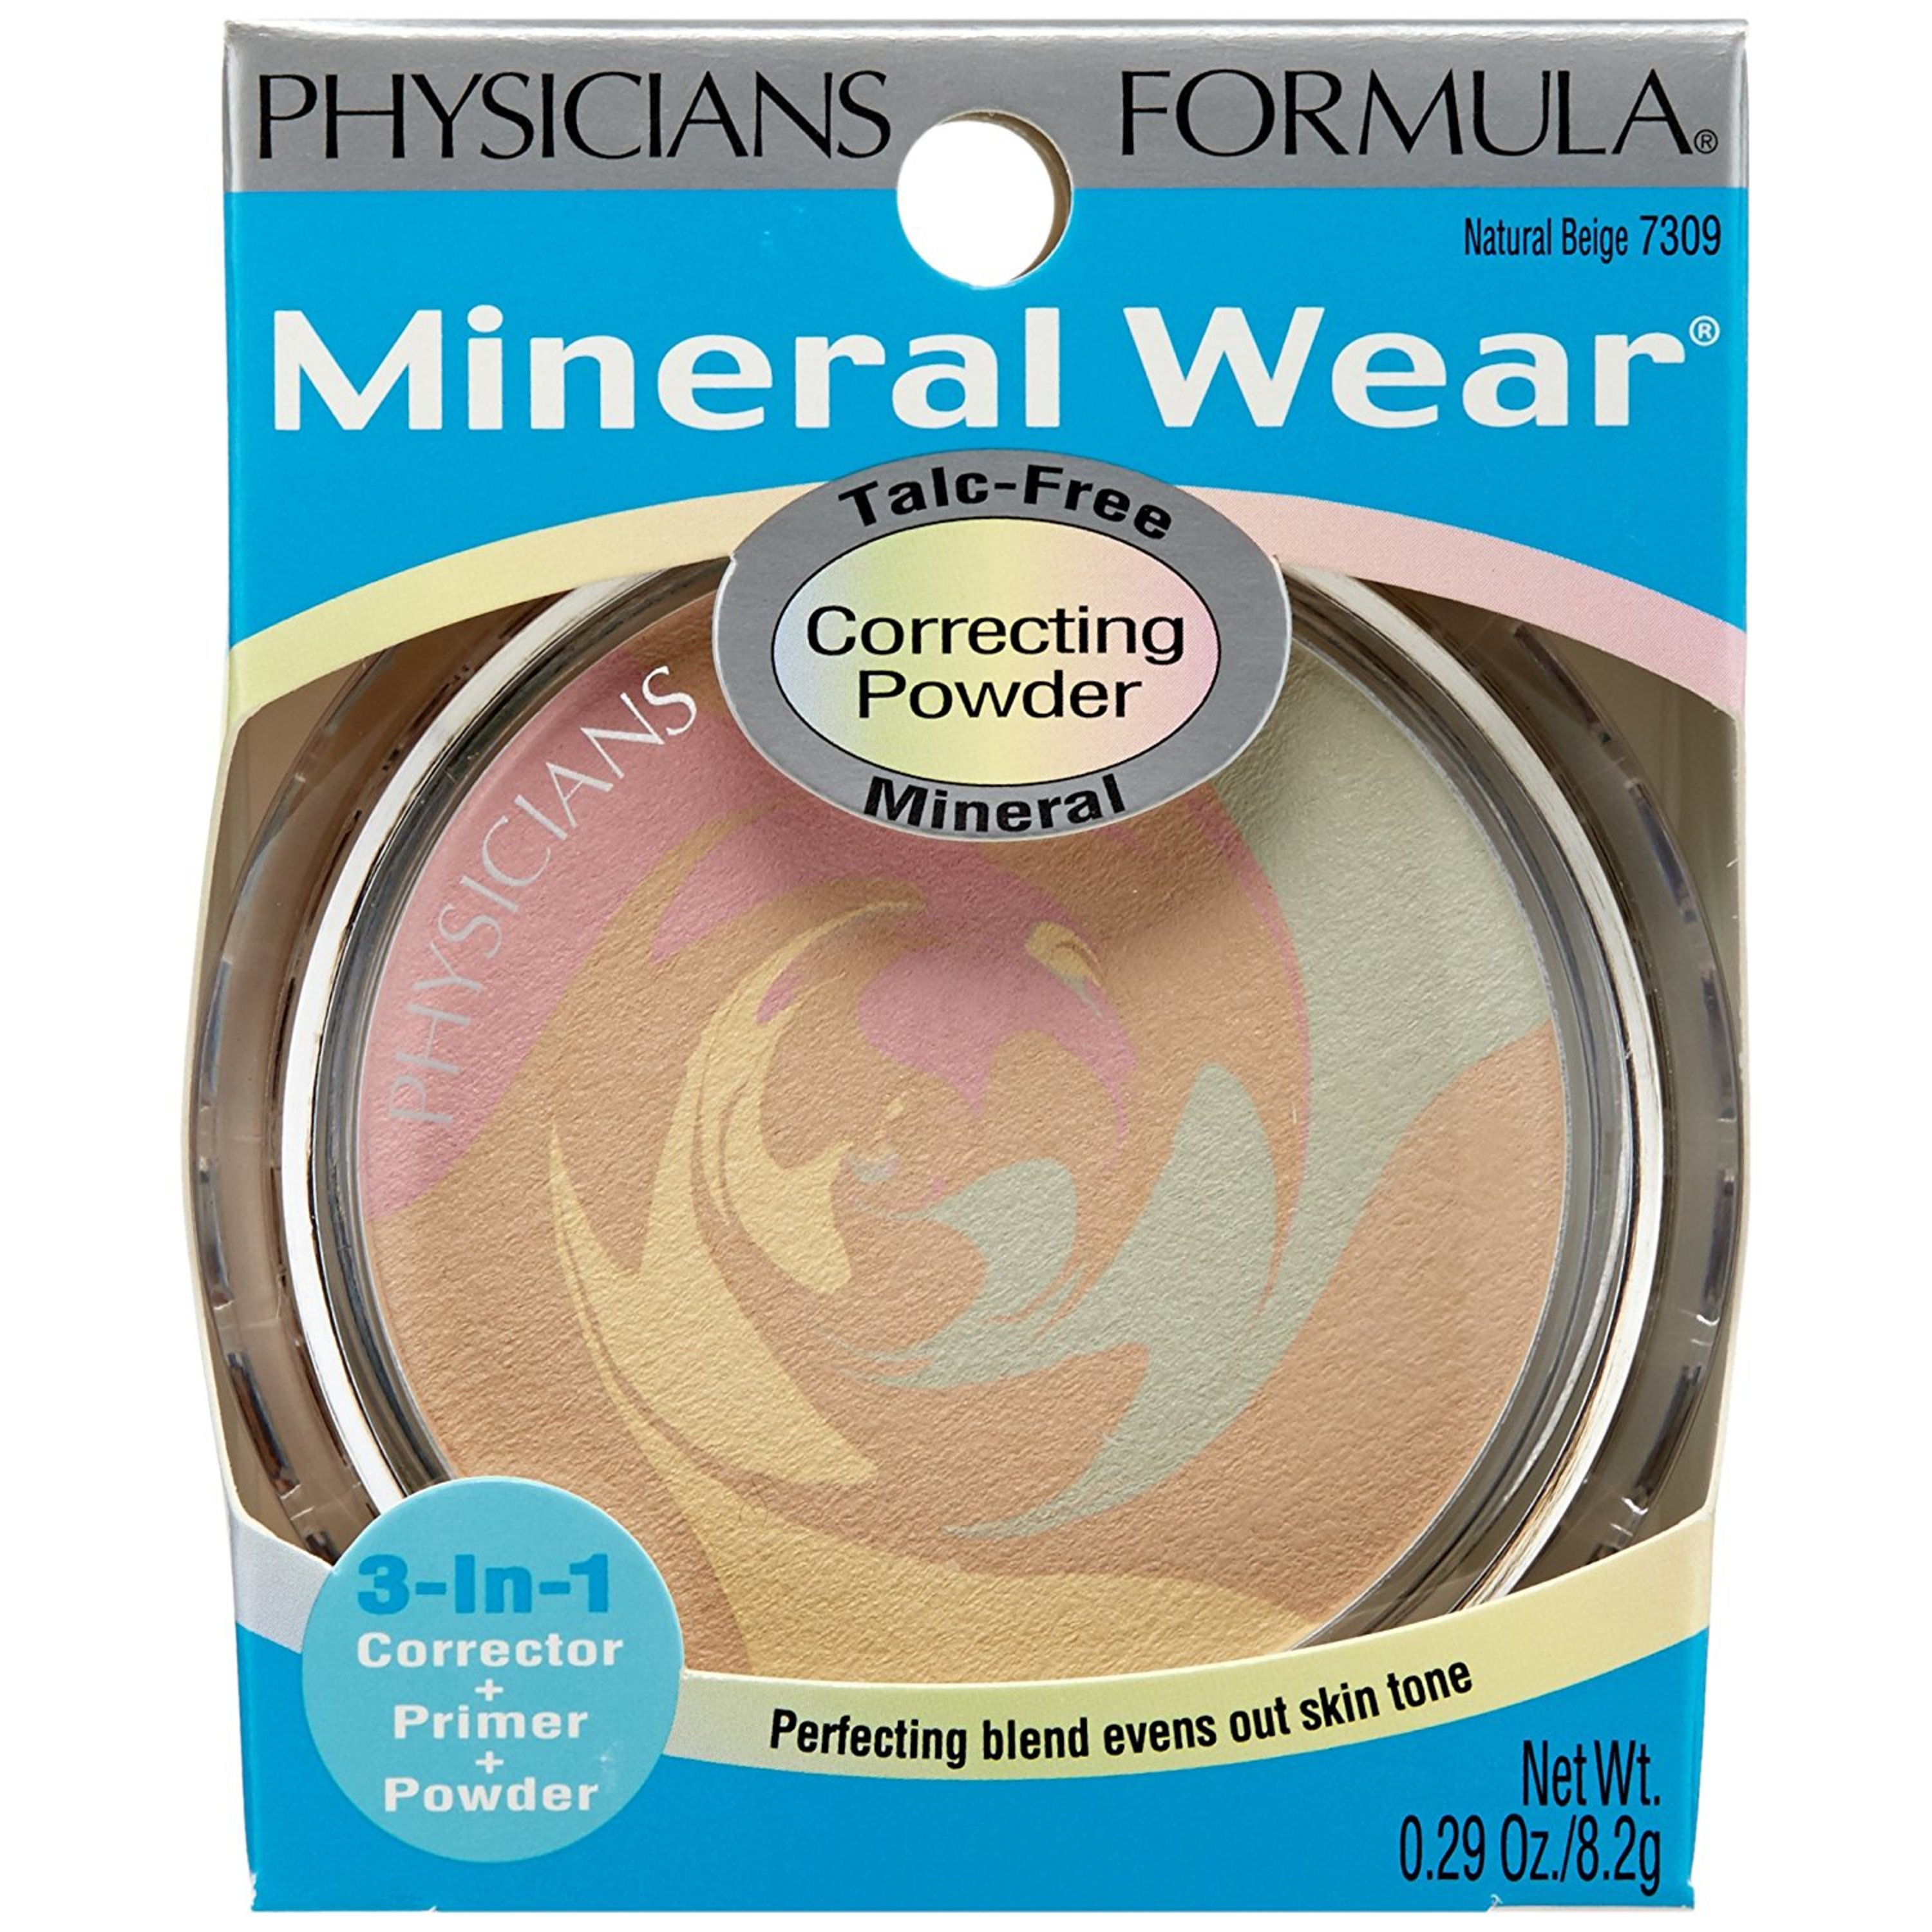 Physicians Formula Mineral Wear® Talc-Free Mineral Correcting Powder, Natural Beige - image 4 of 6